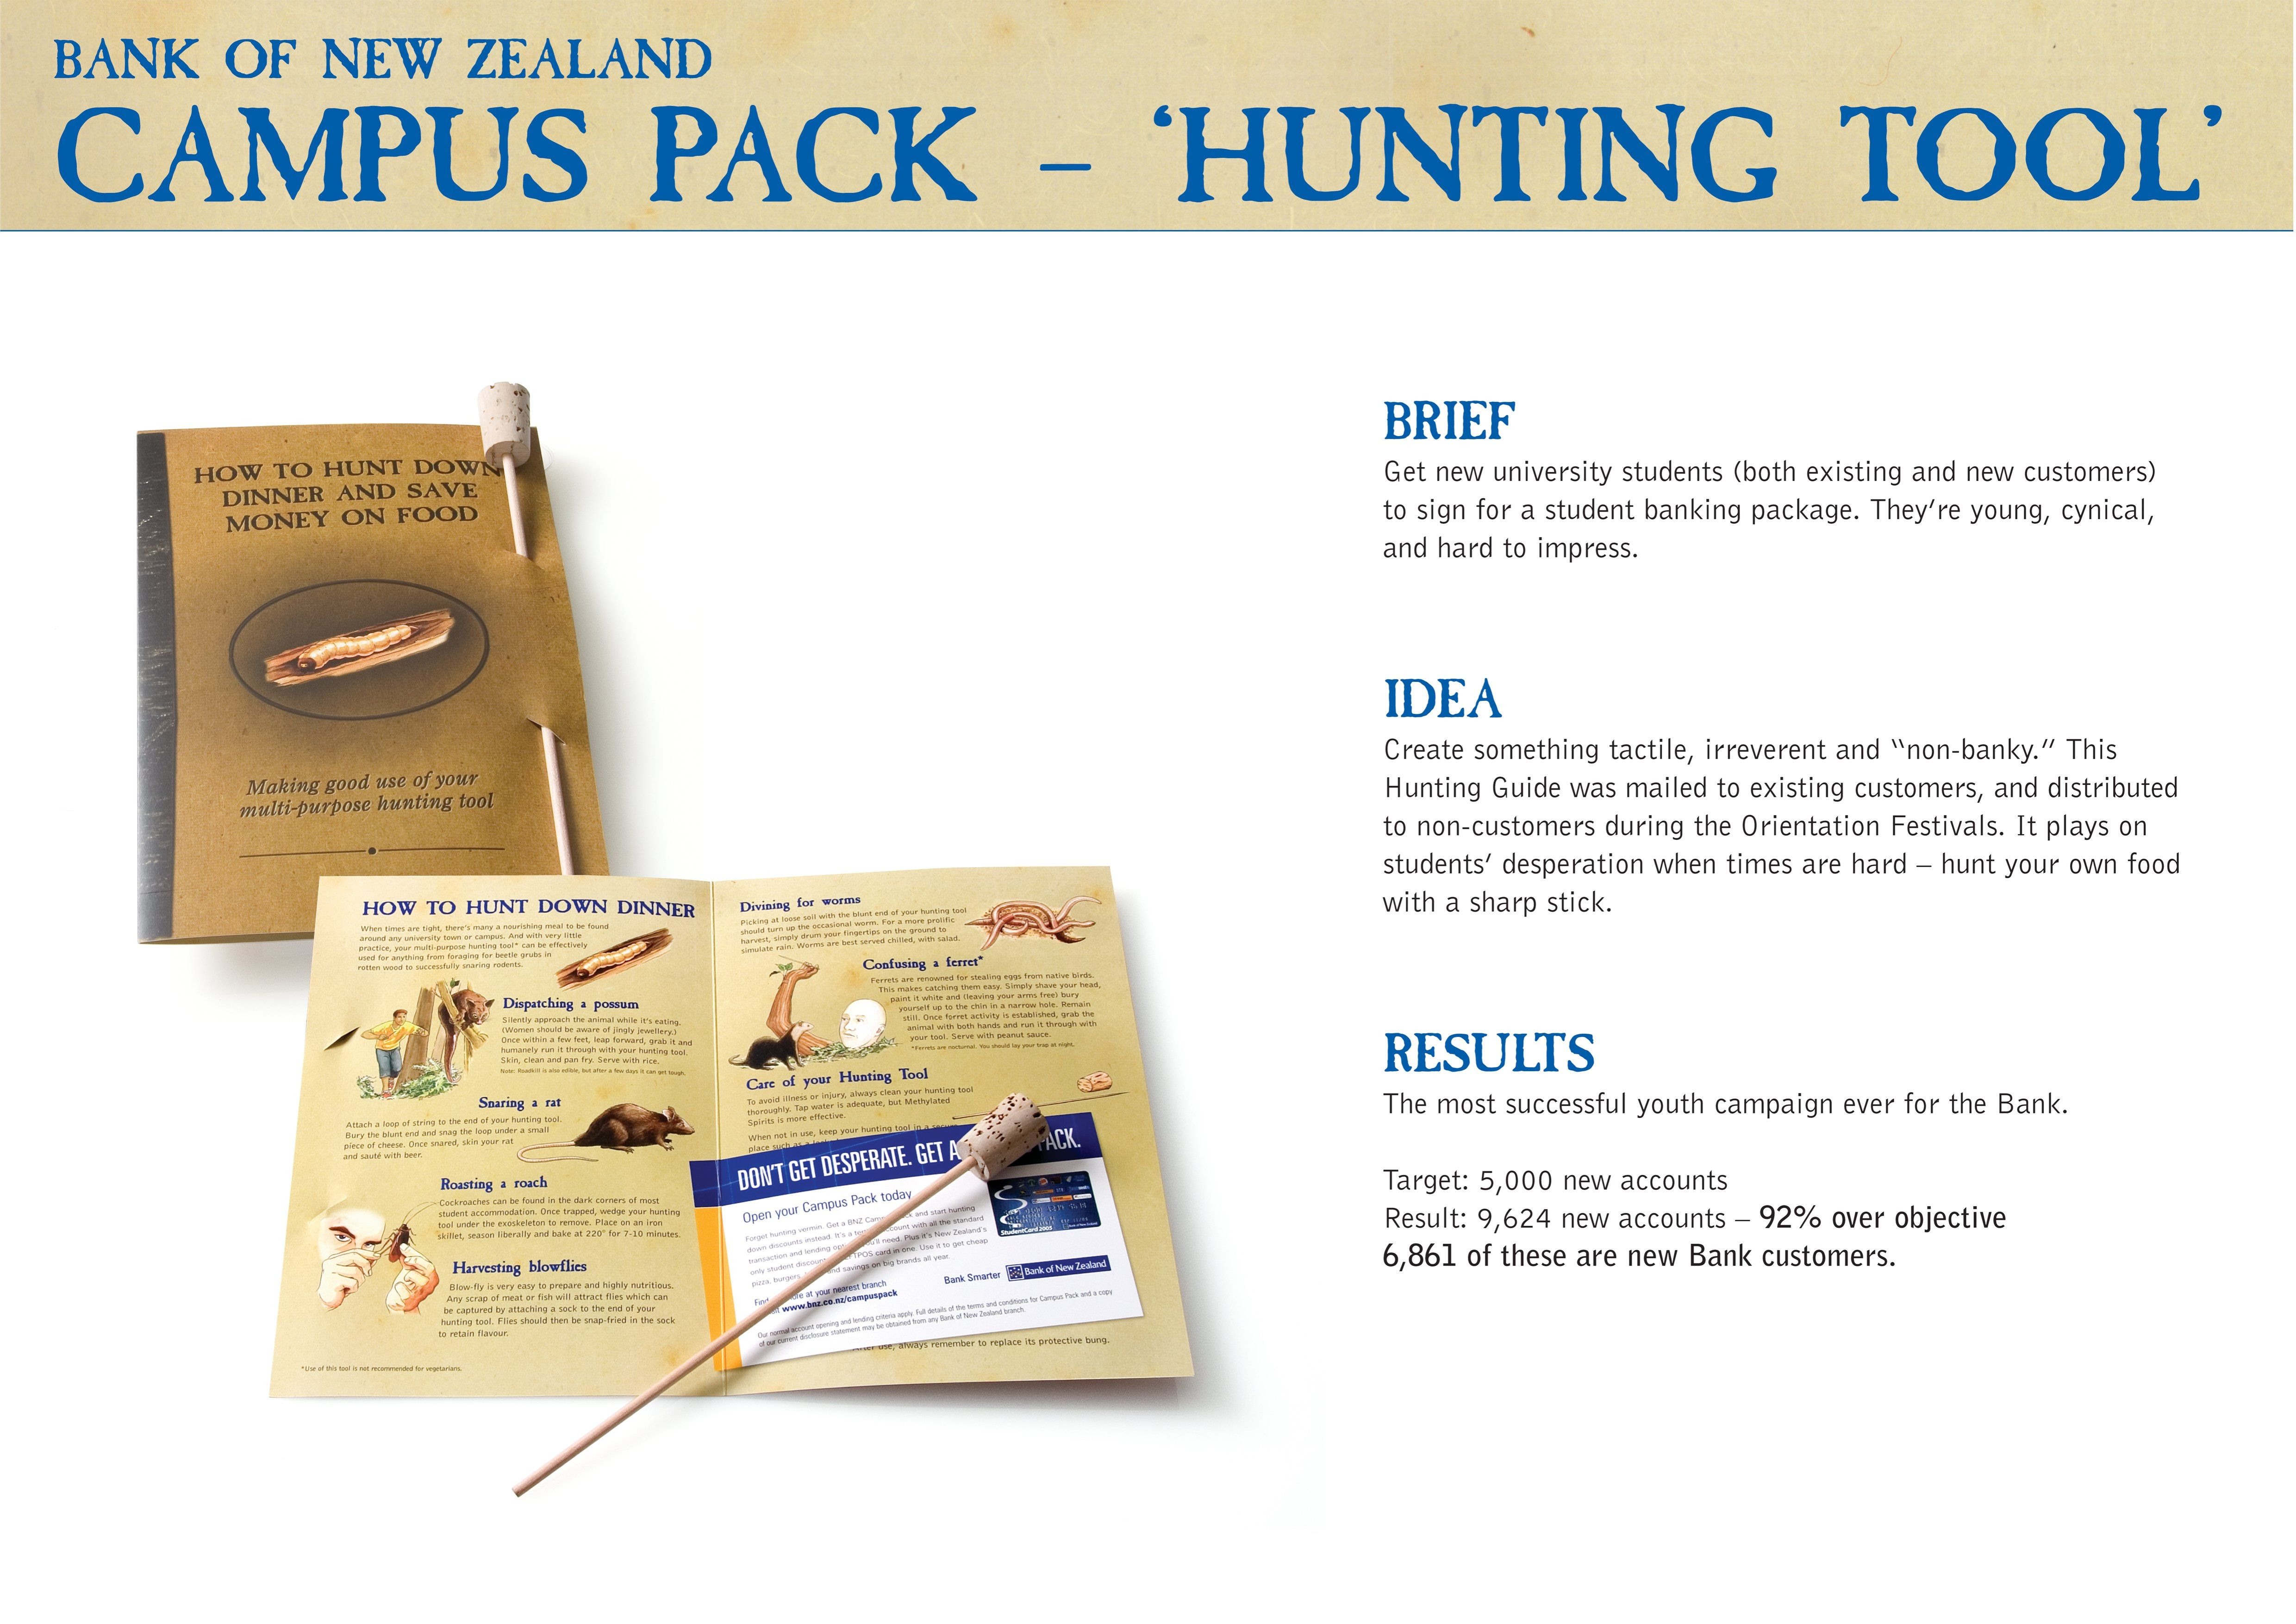 HUNTING GUIDE